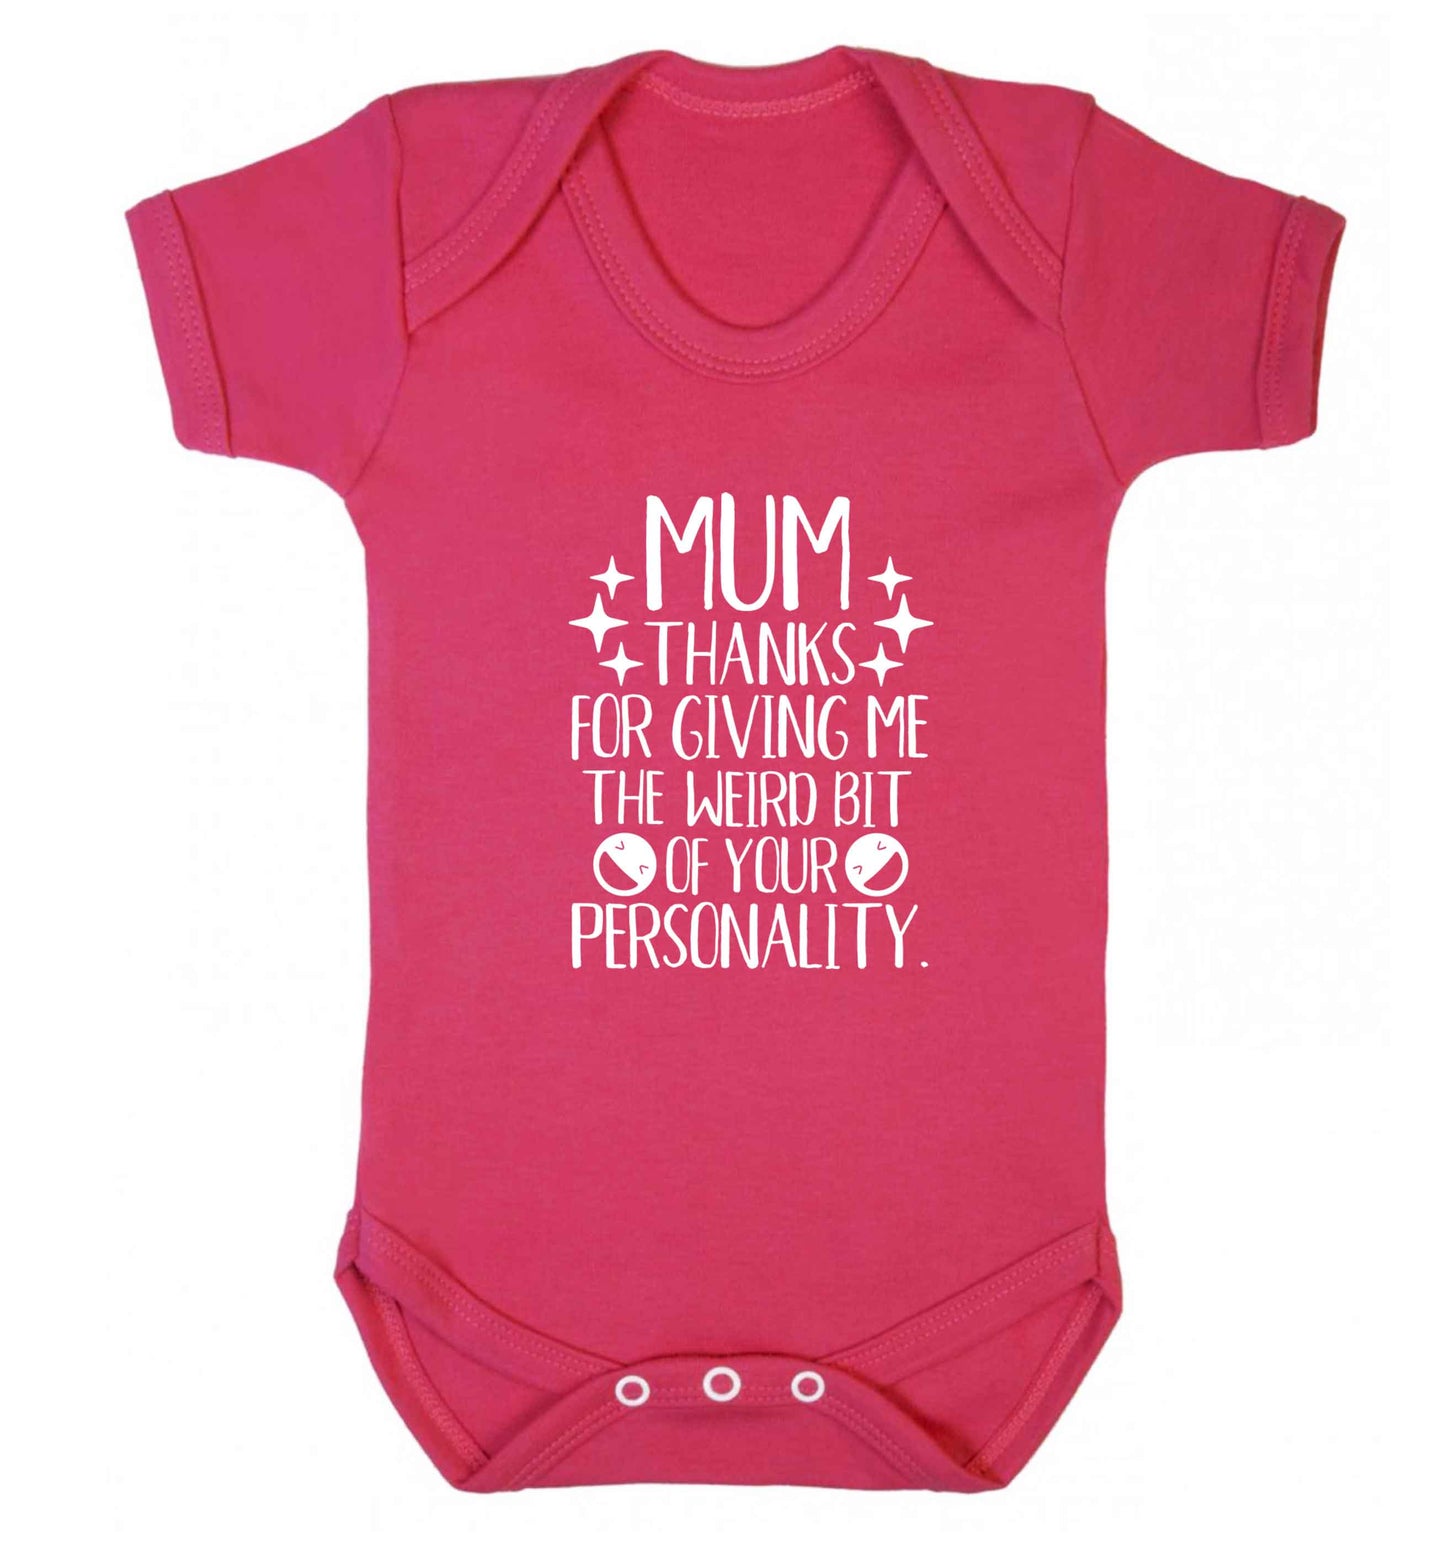 Mum thanks for giving me the weird bit of your personality baby vest dark pink 18-24 months